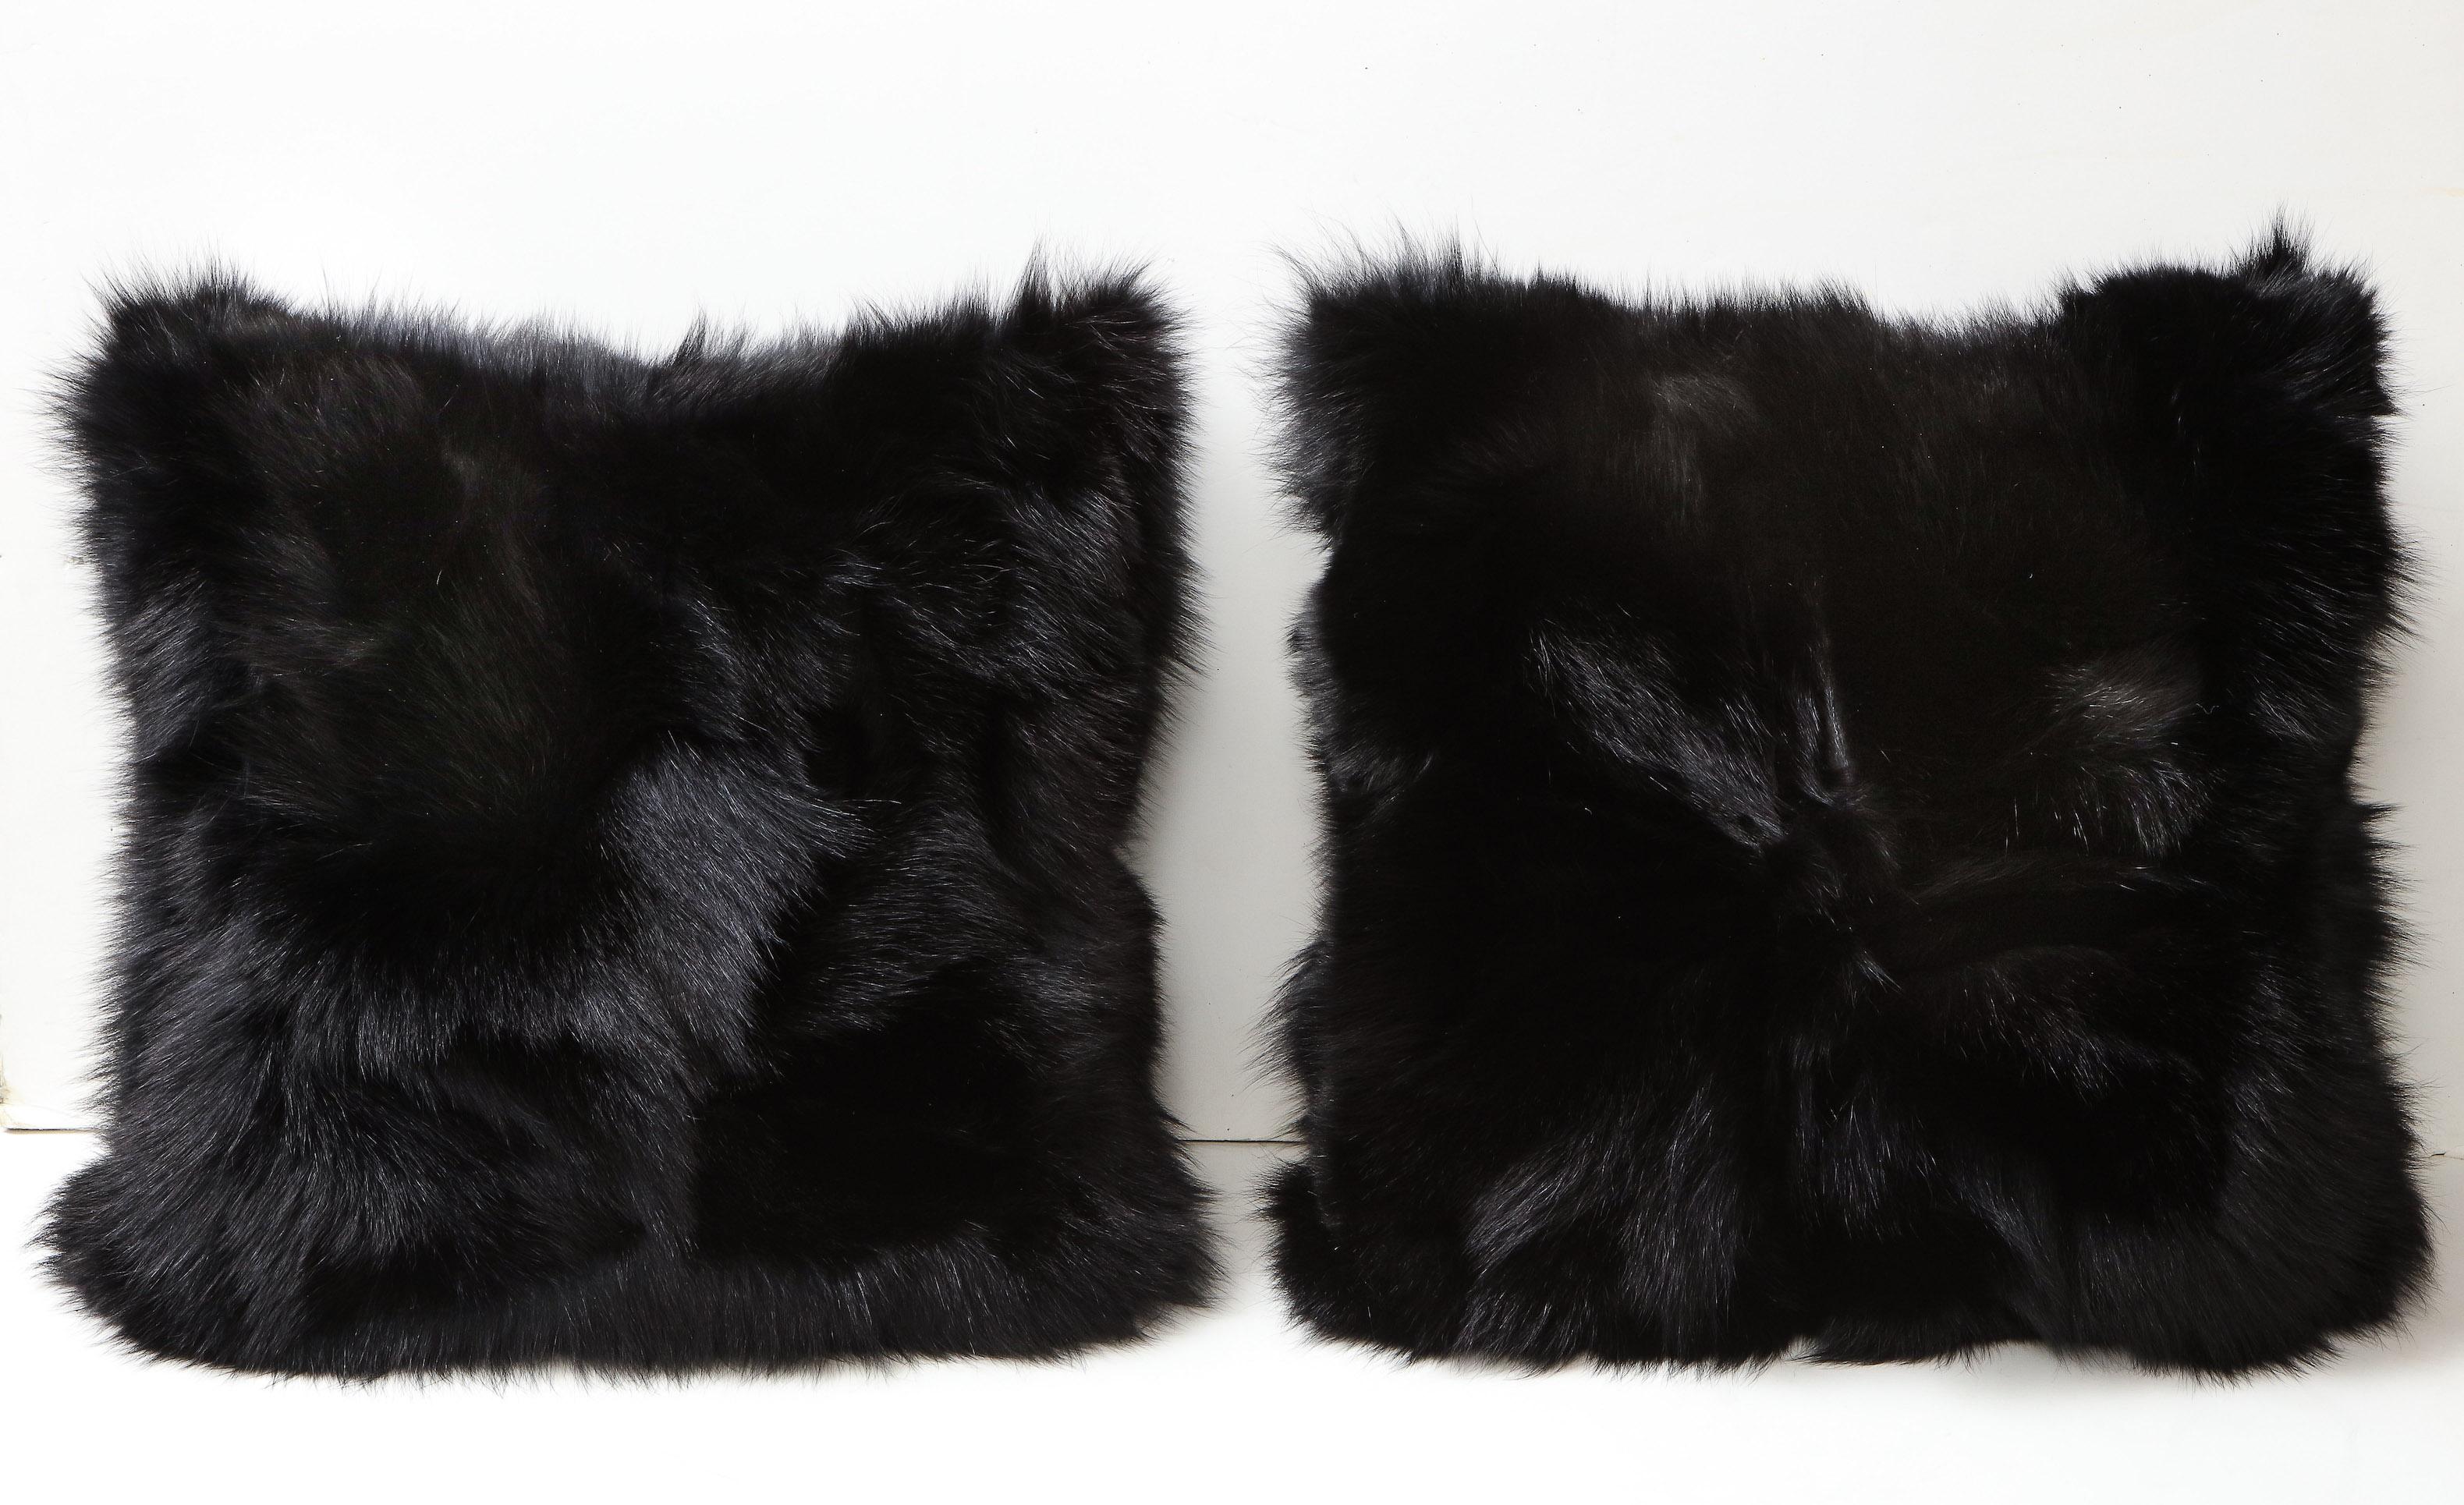 Fur Double Sided Toscana Shearling Pillow in Black Color